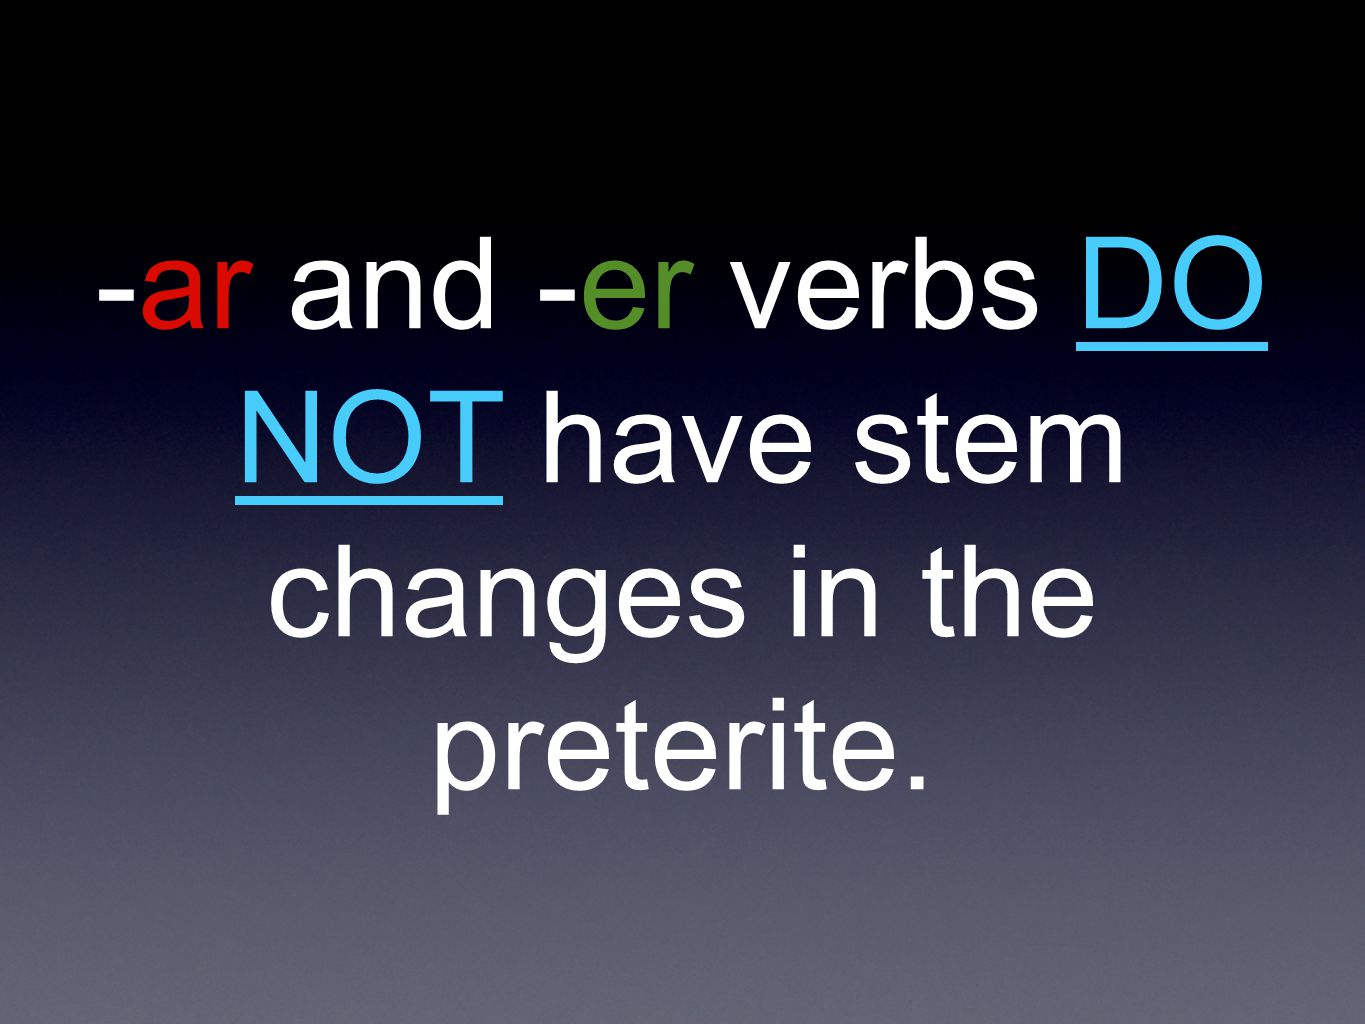 -ar and -er verbs DO NOT have stem changes in the preterite.